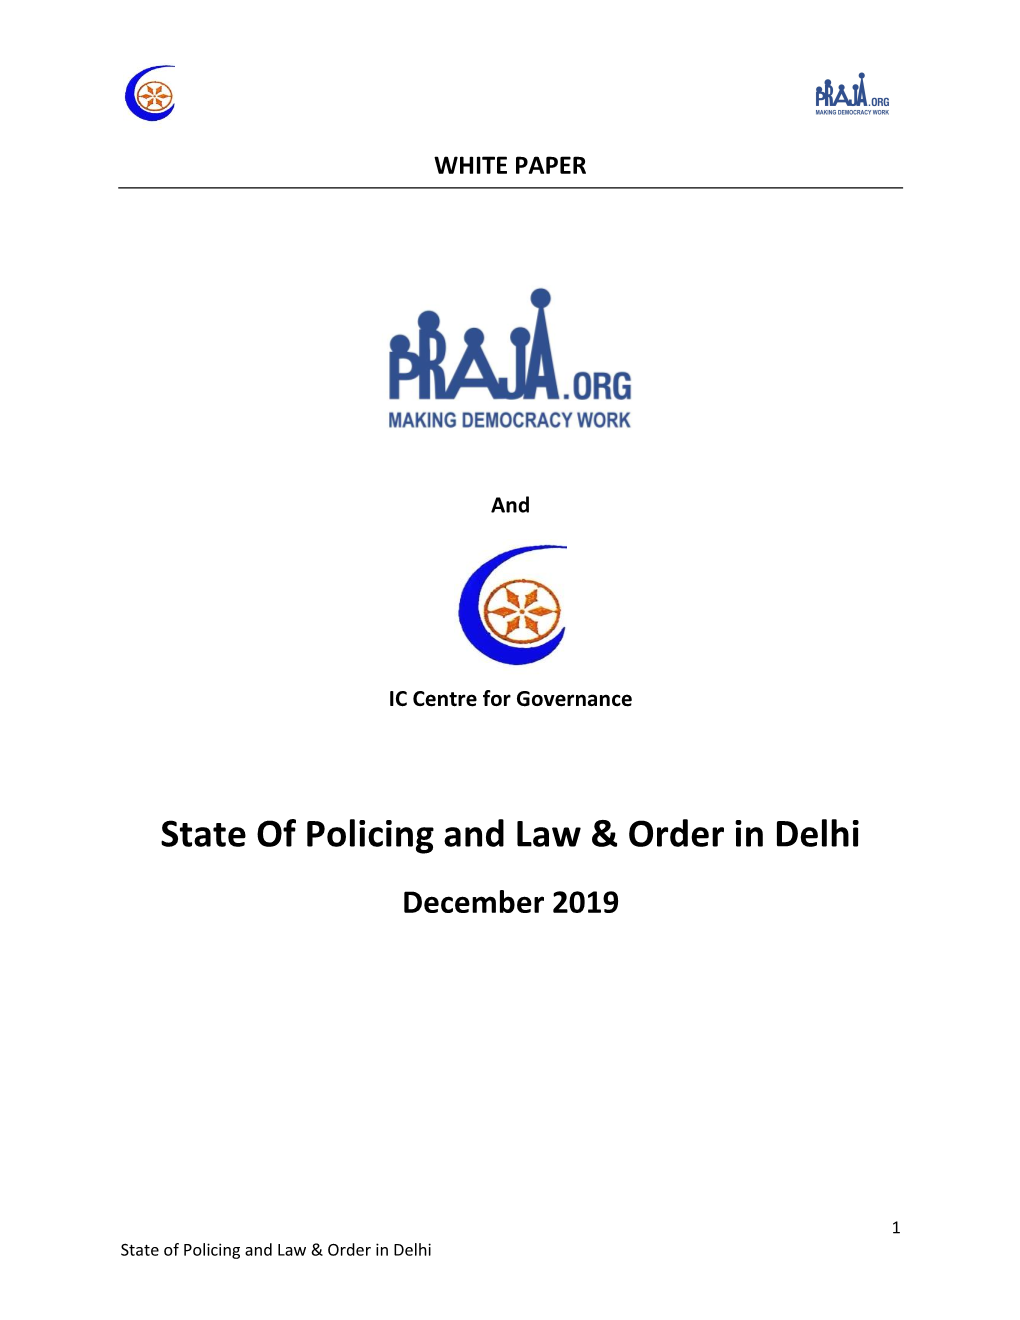 State of Policing and Law & Order in Delhi